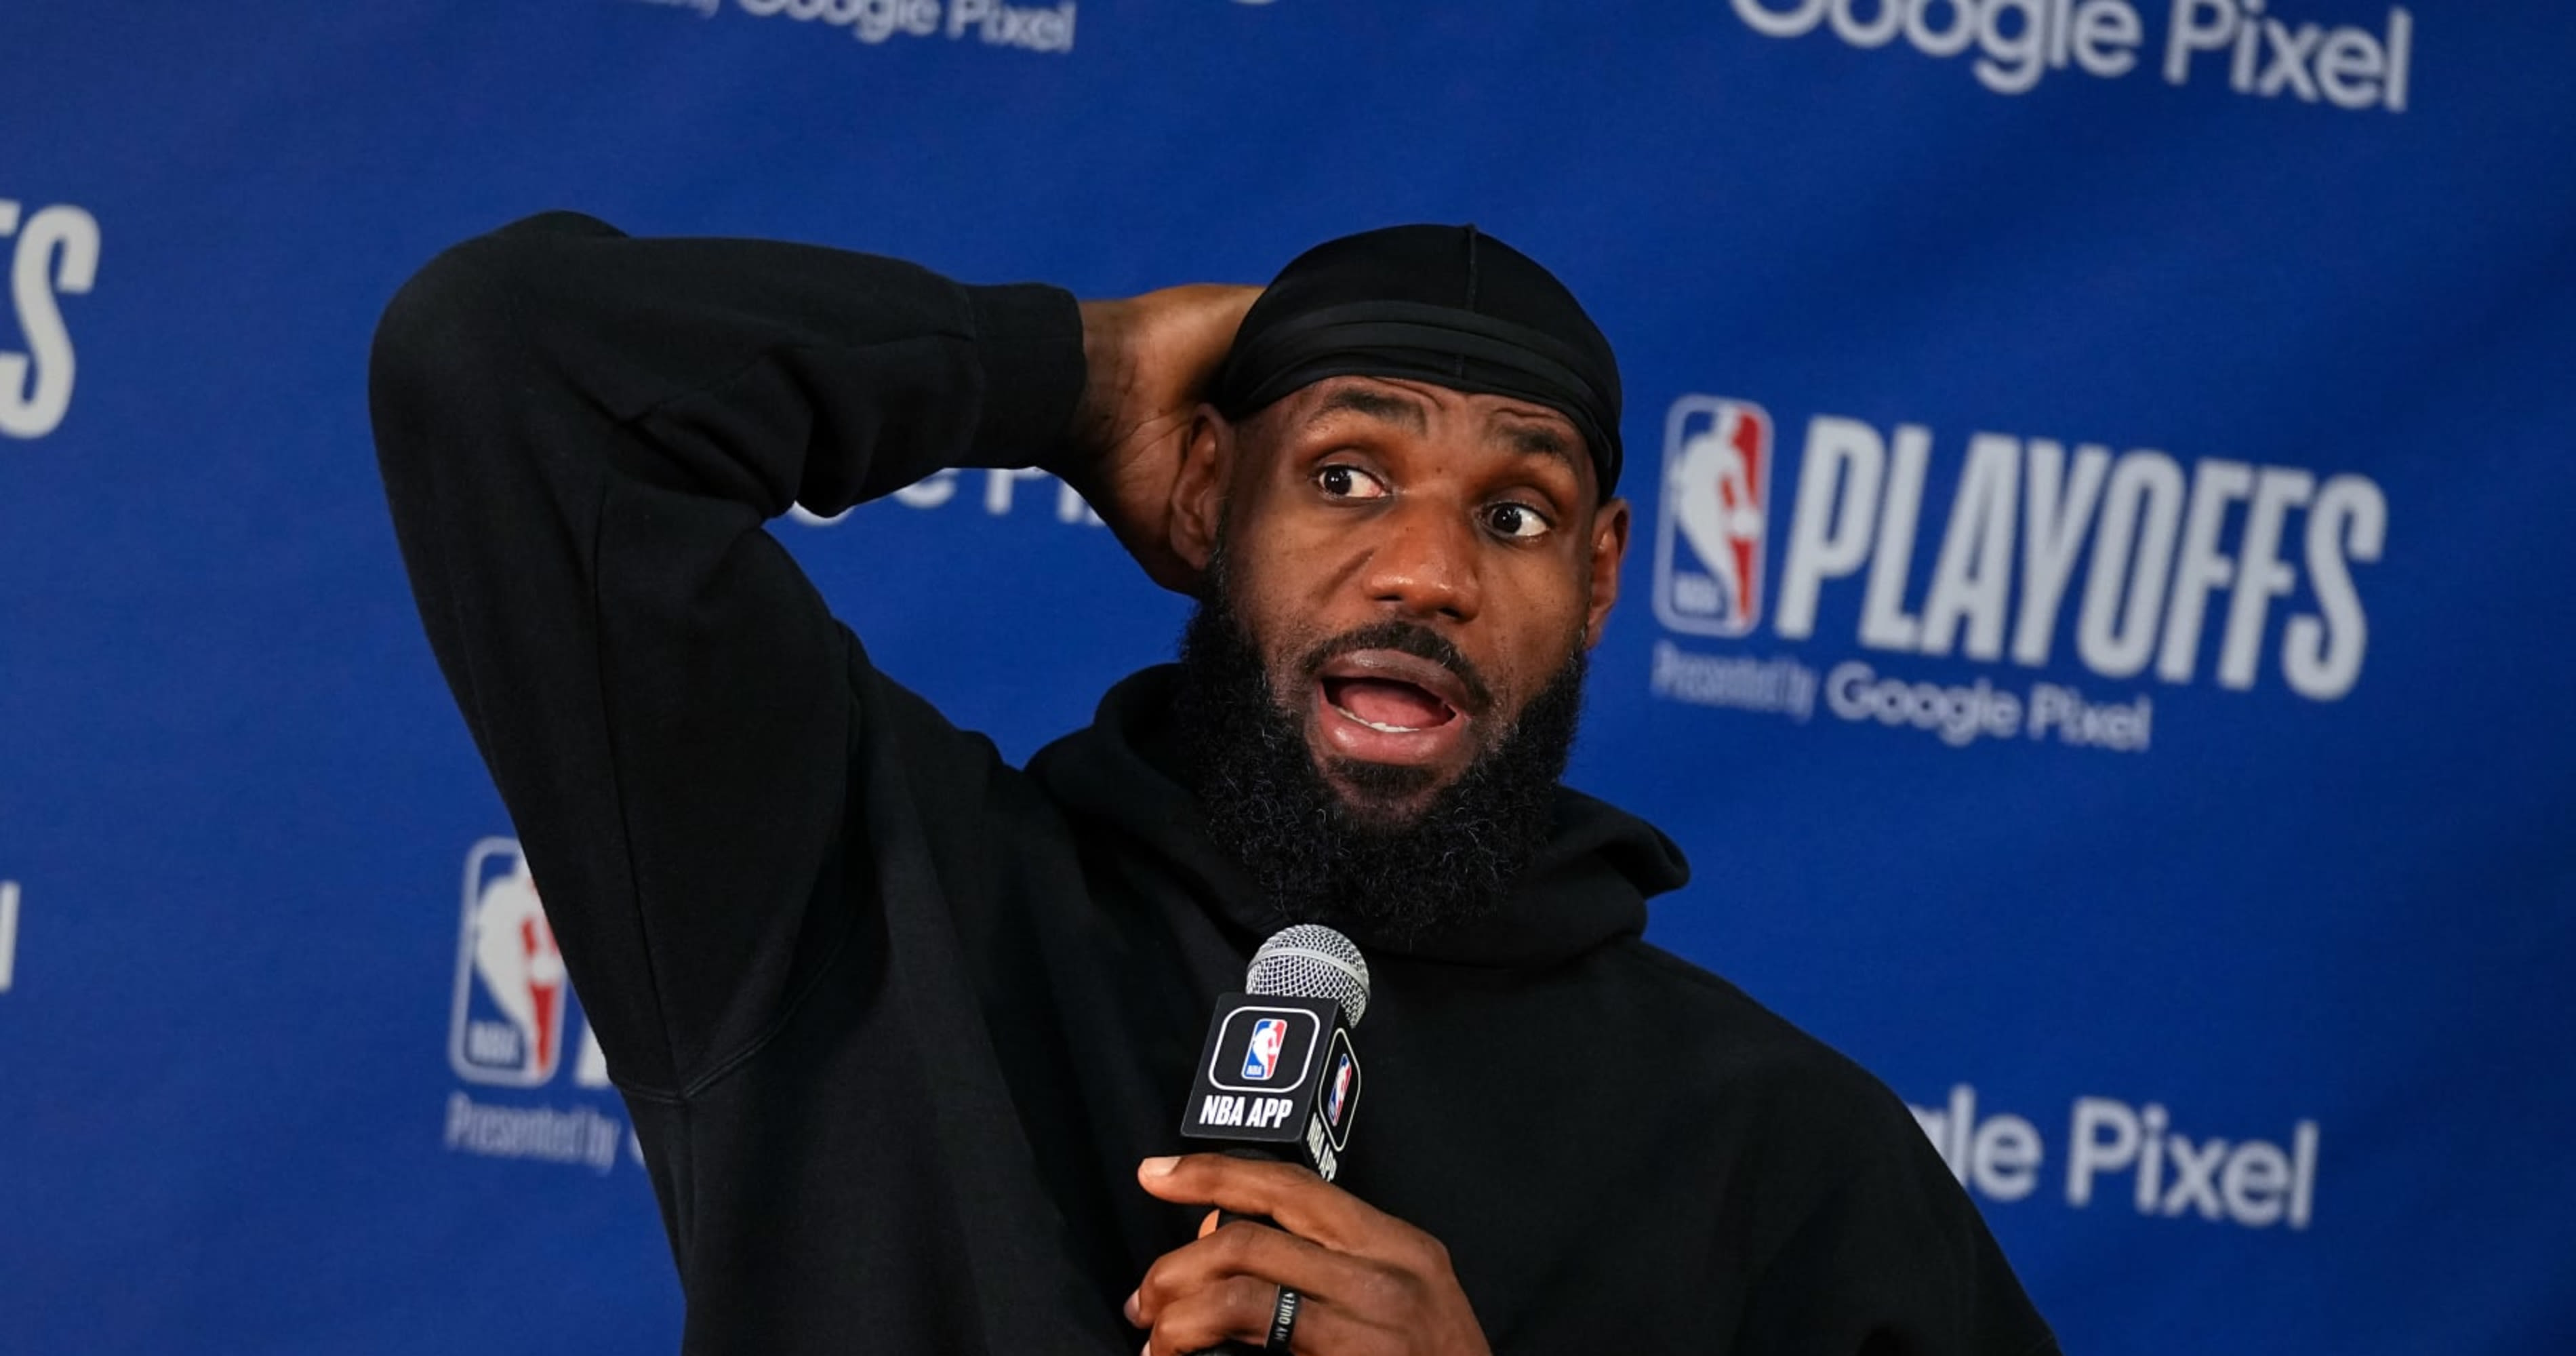 LeBron James: I've Realized Players Only Watch Highlights and Don't Watch Basketball